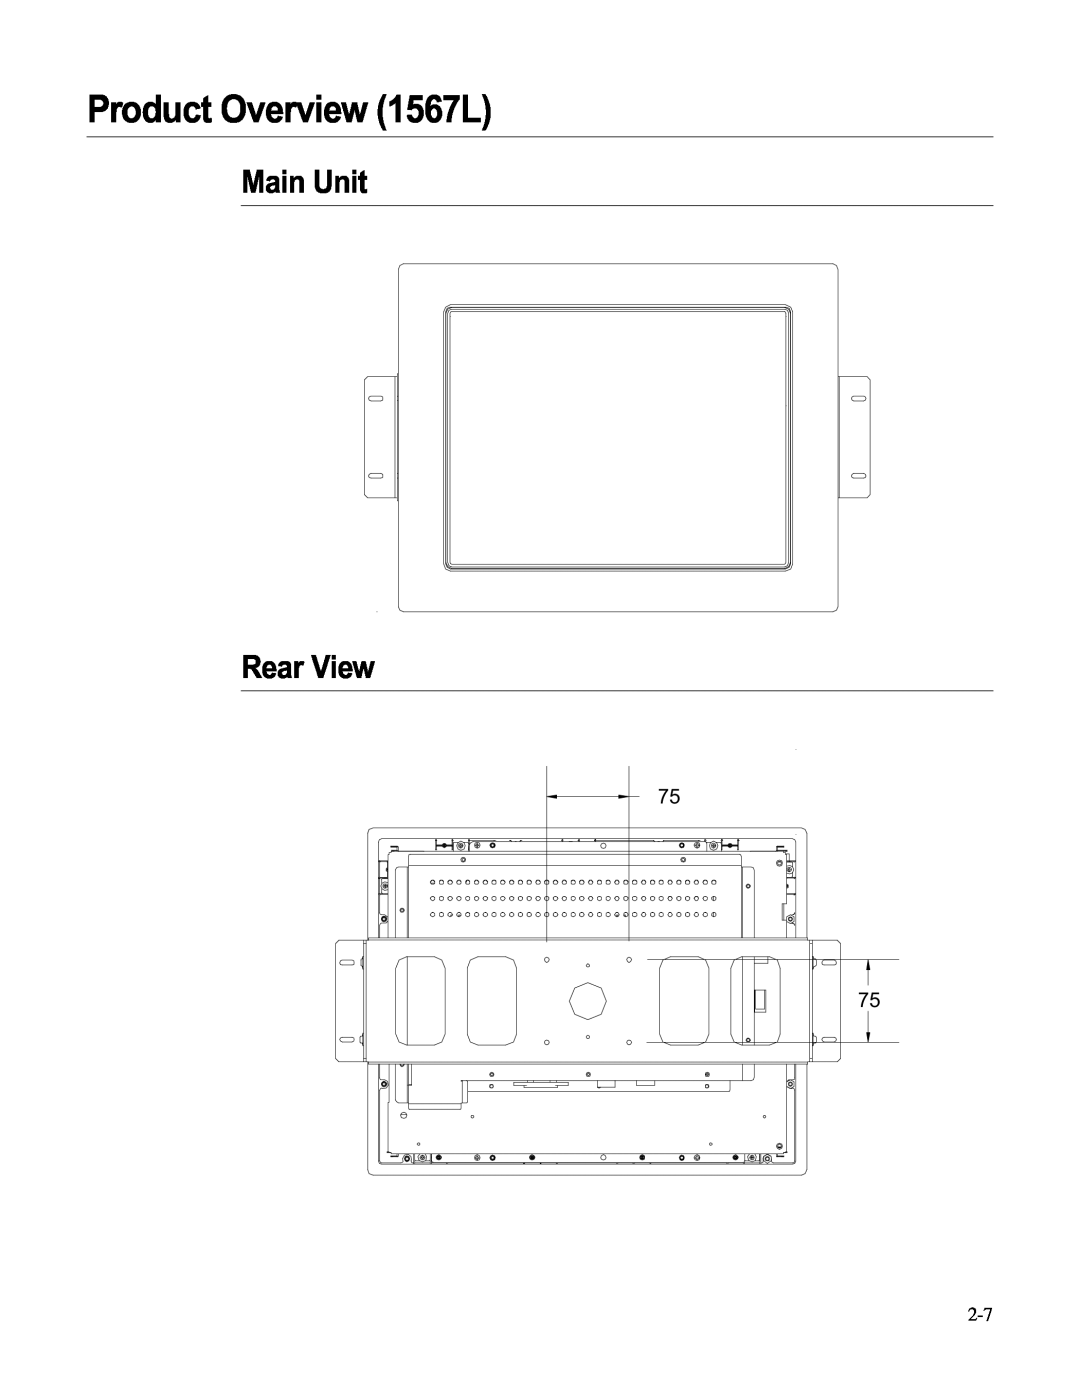 Elo TouchSystems LCD manual Product Overview 1567L, Main Unit Rear View 